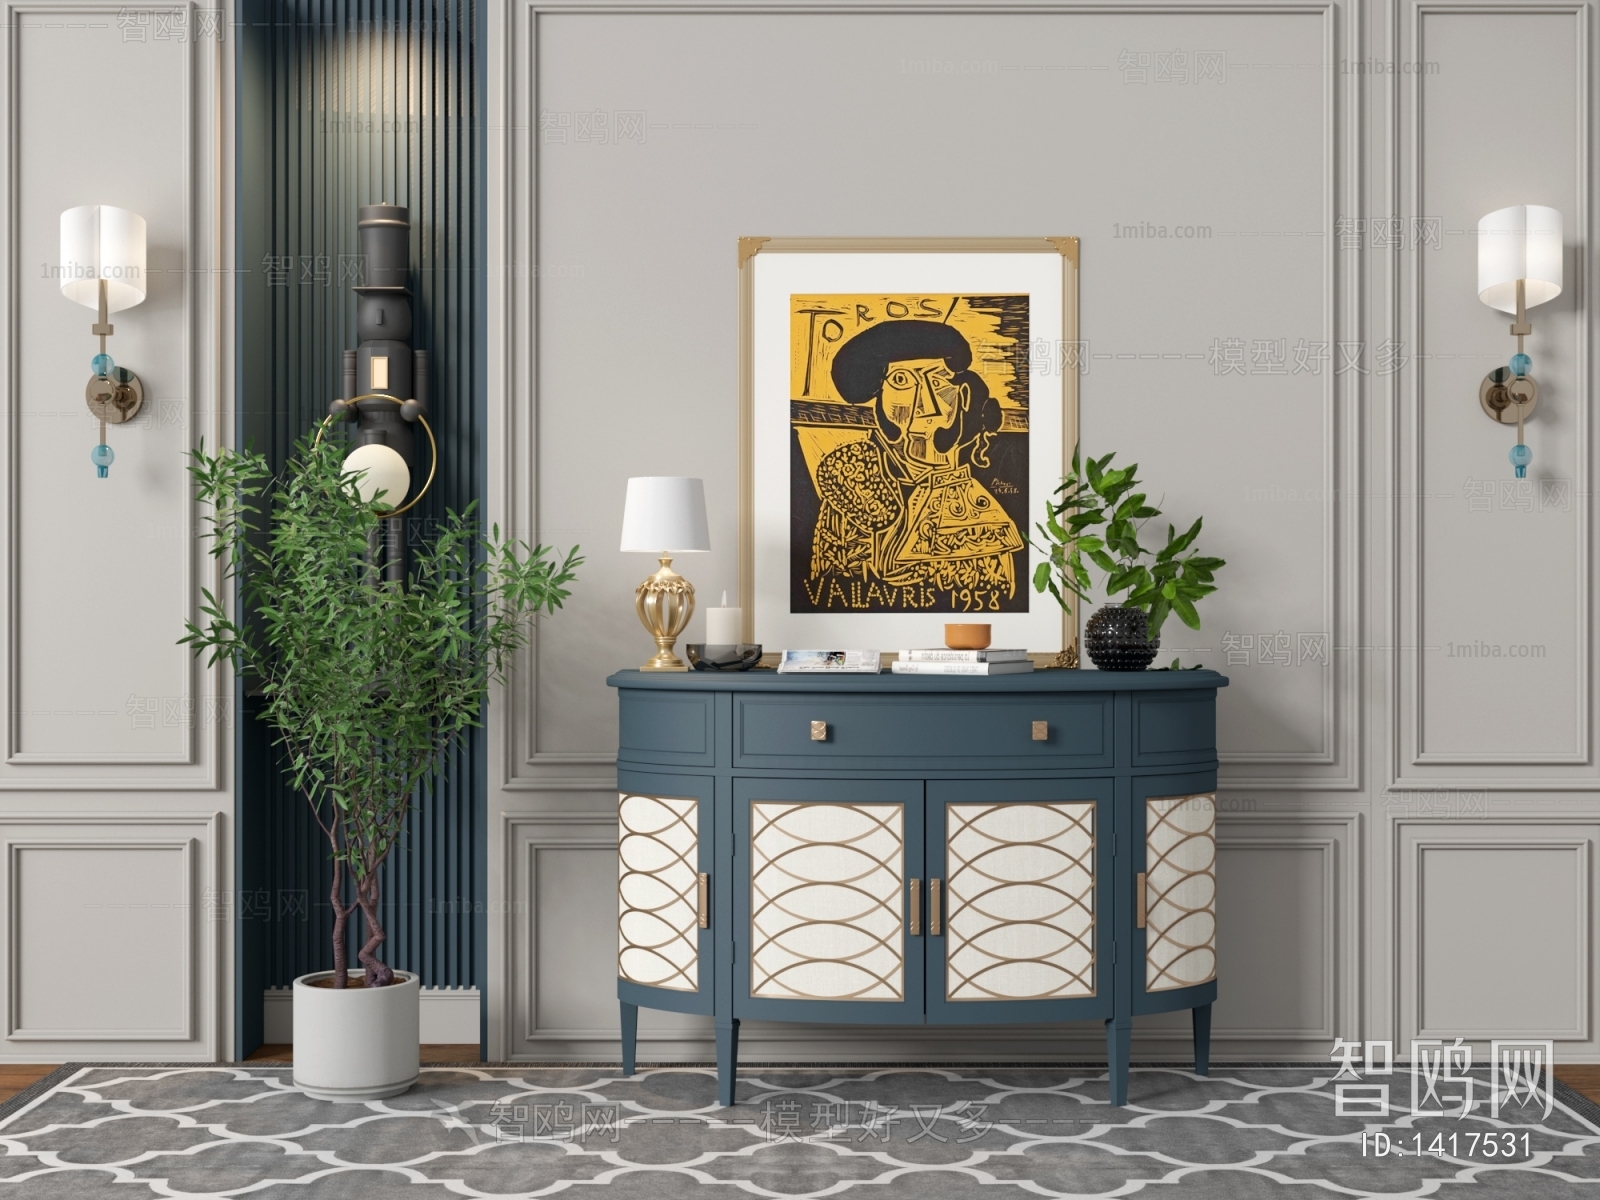 American Style Entrance Cabinet